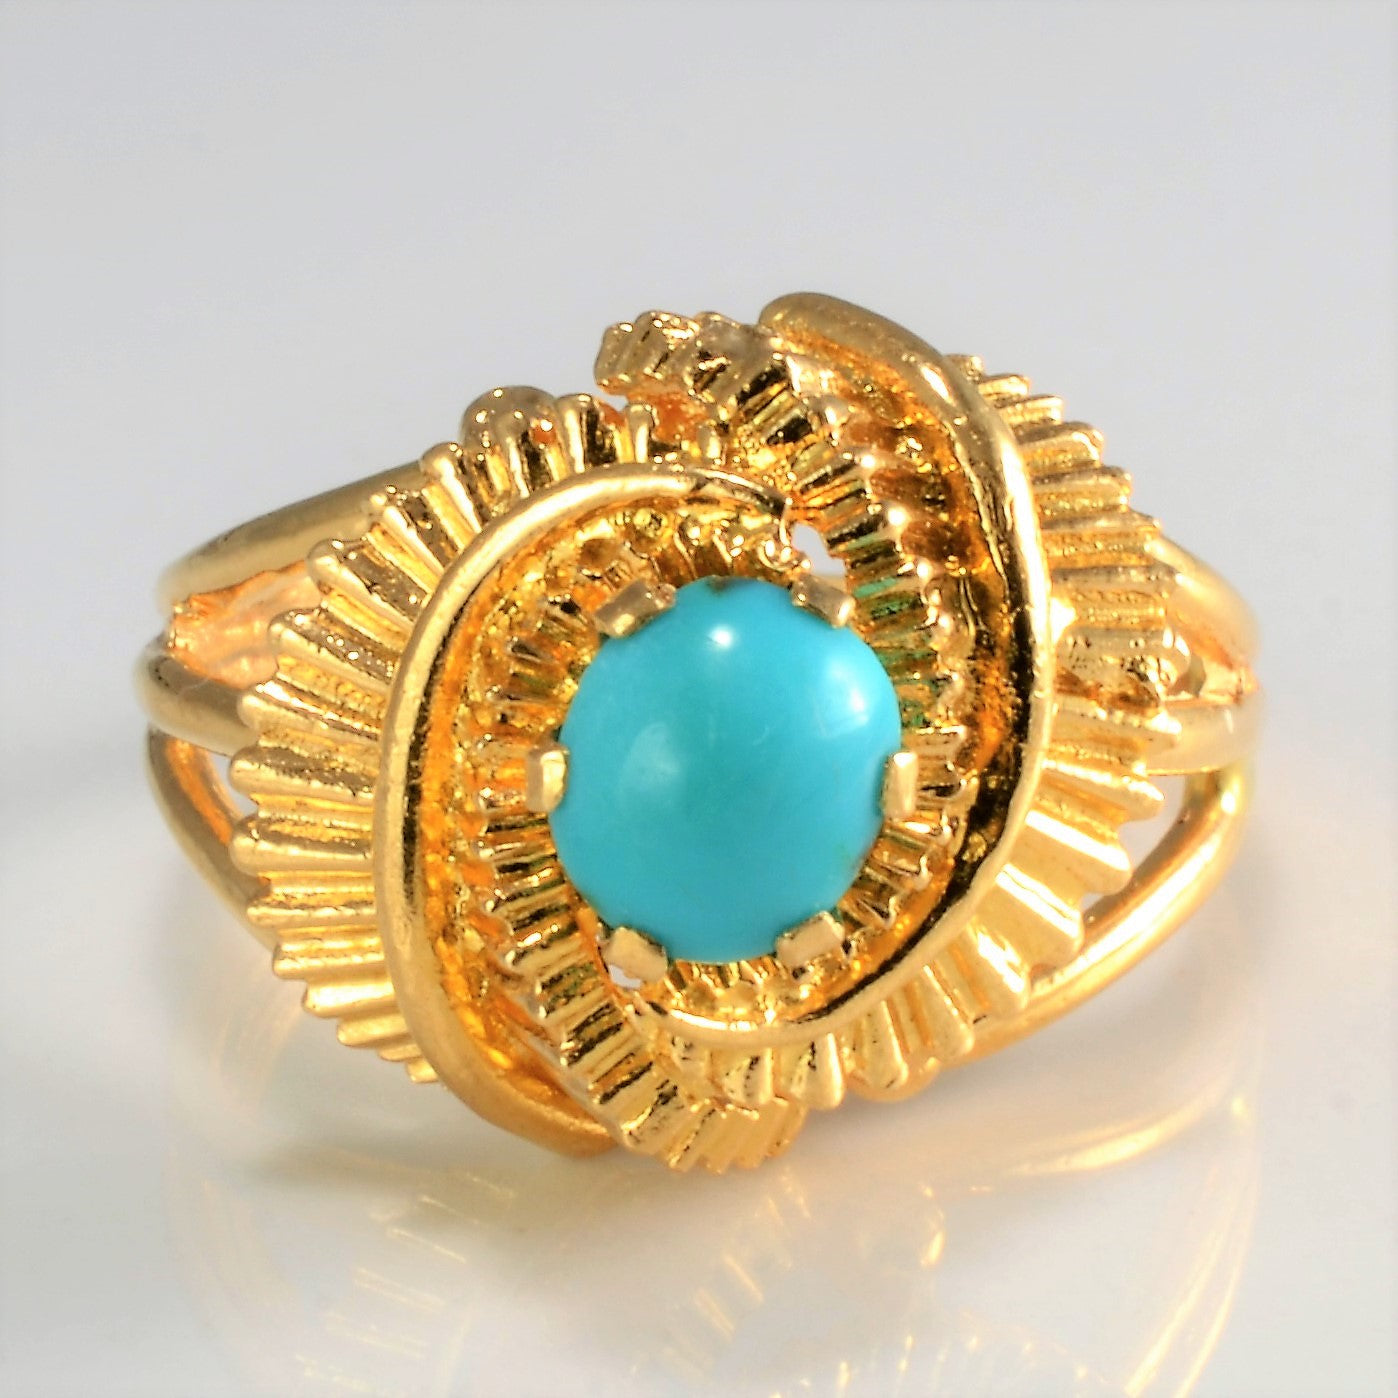 Bypass Persian Style Turquoise Ladies Ring | SZ 7.25 |